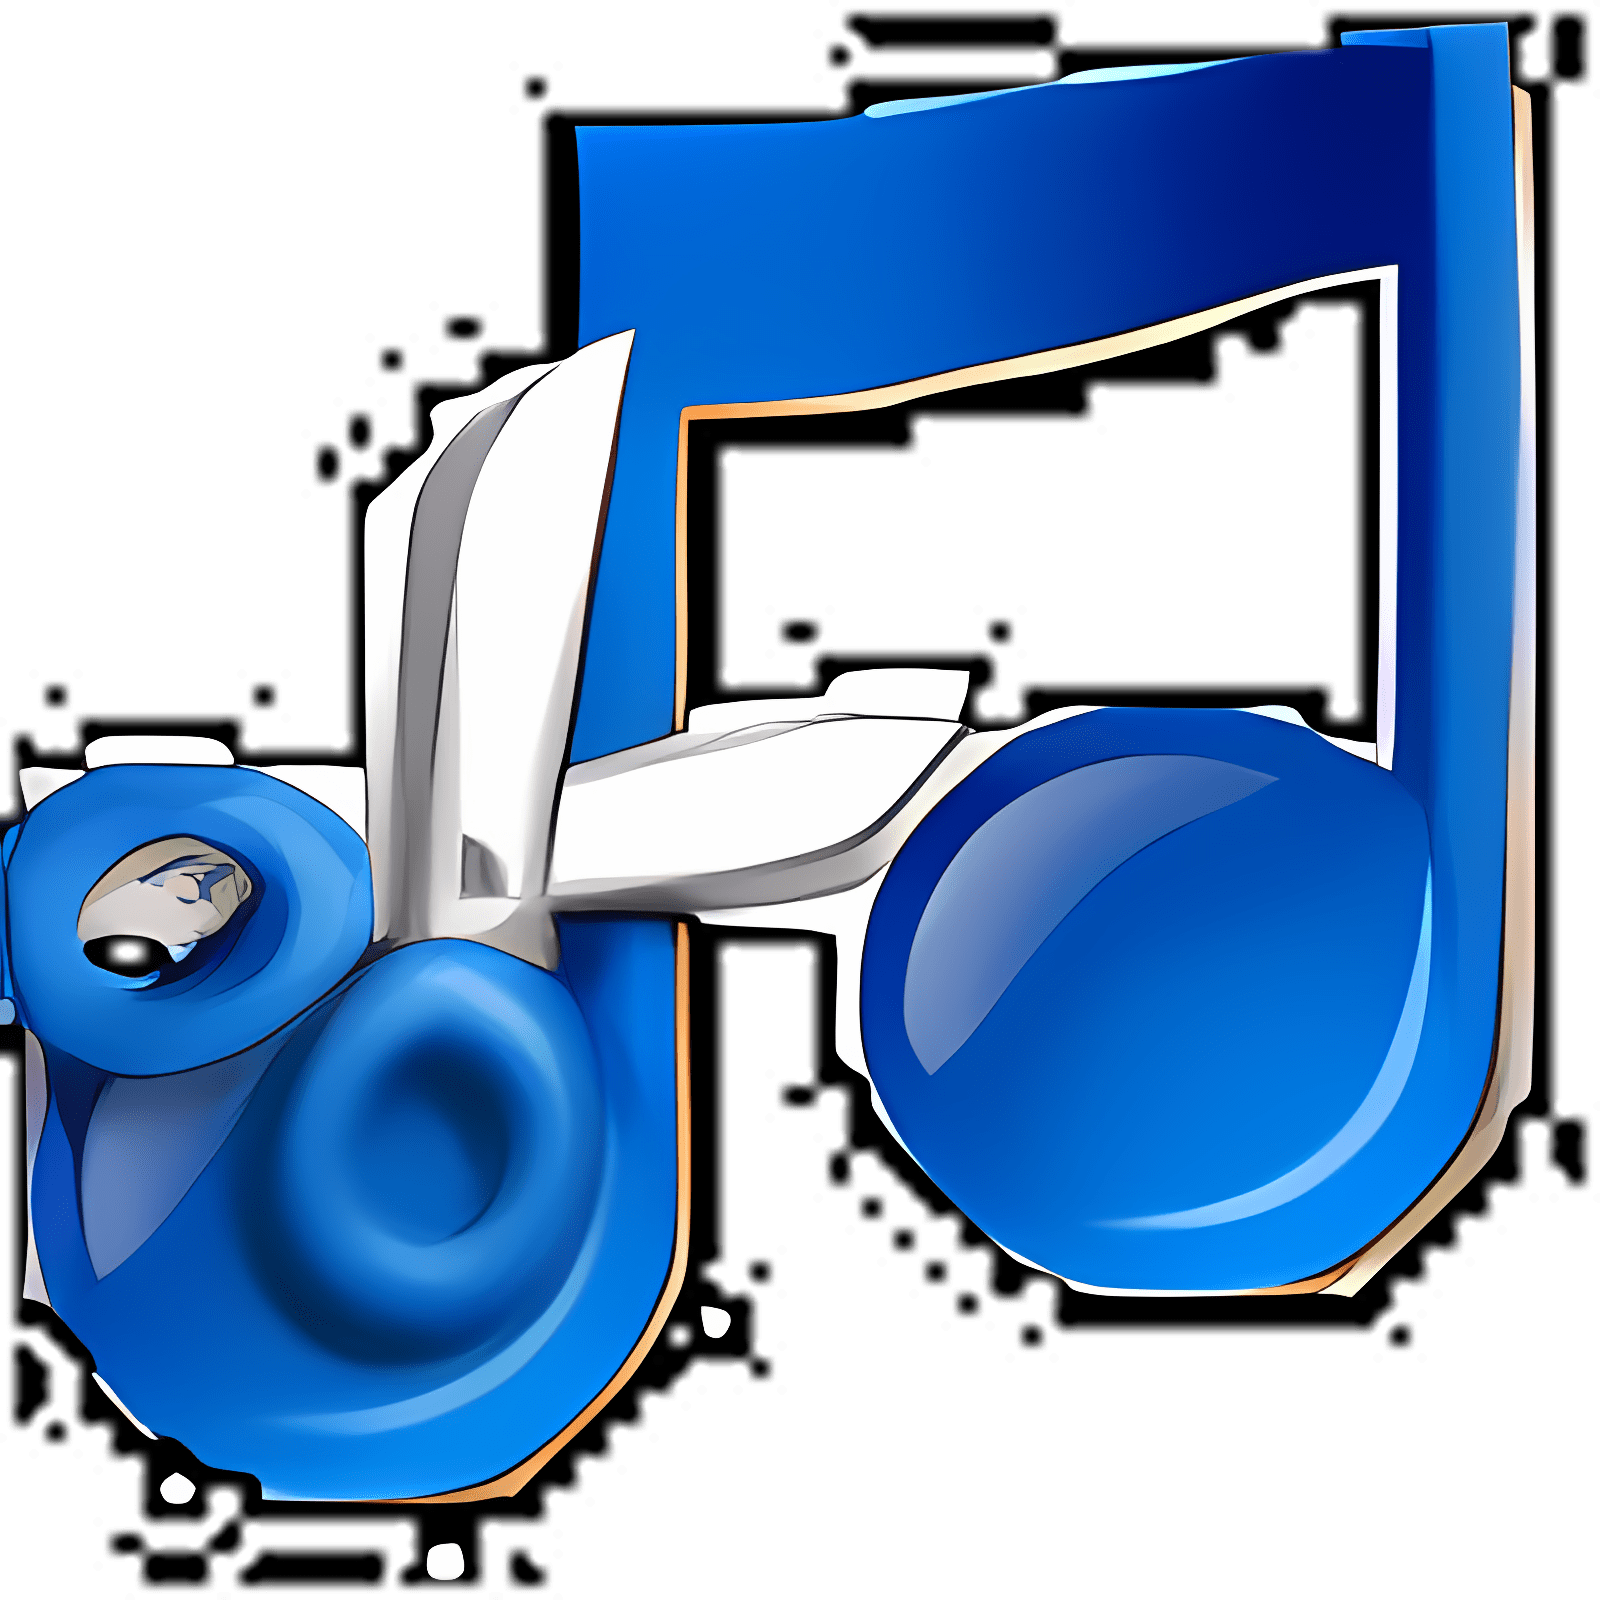 mp3 cutter joiner software free download